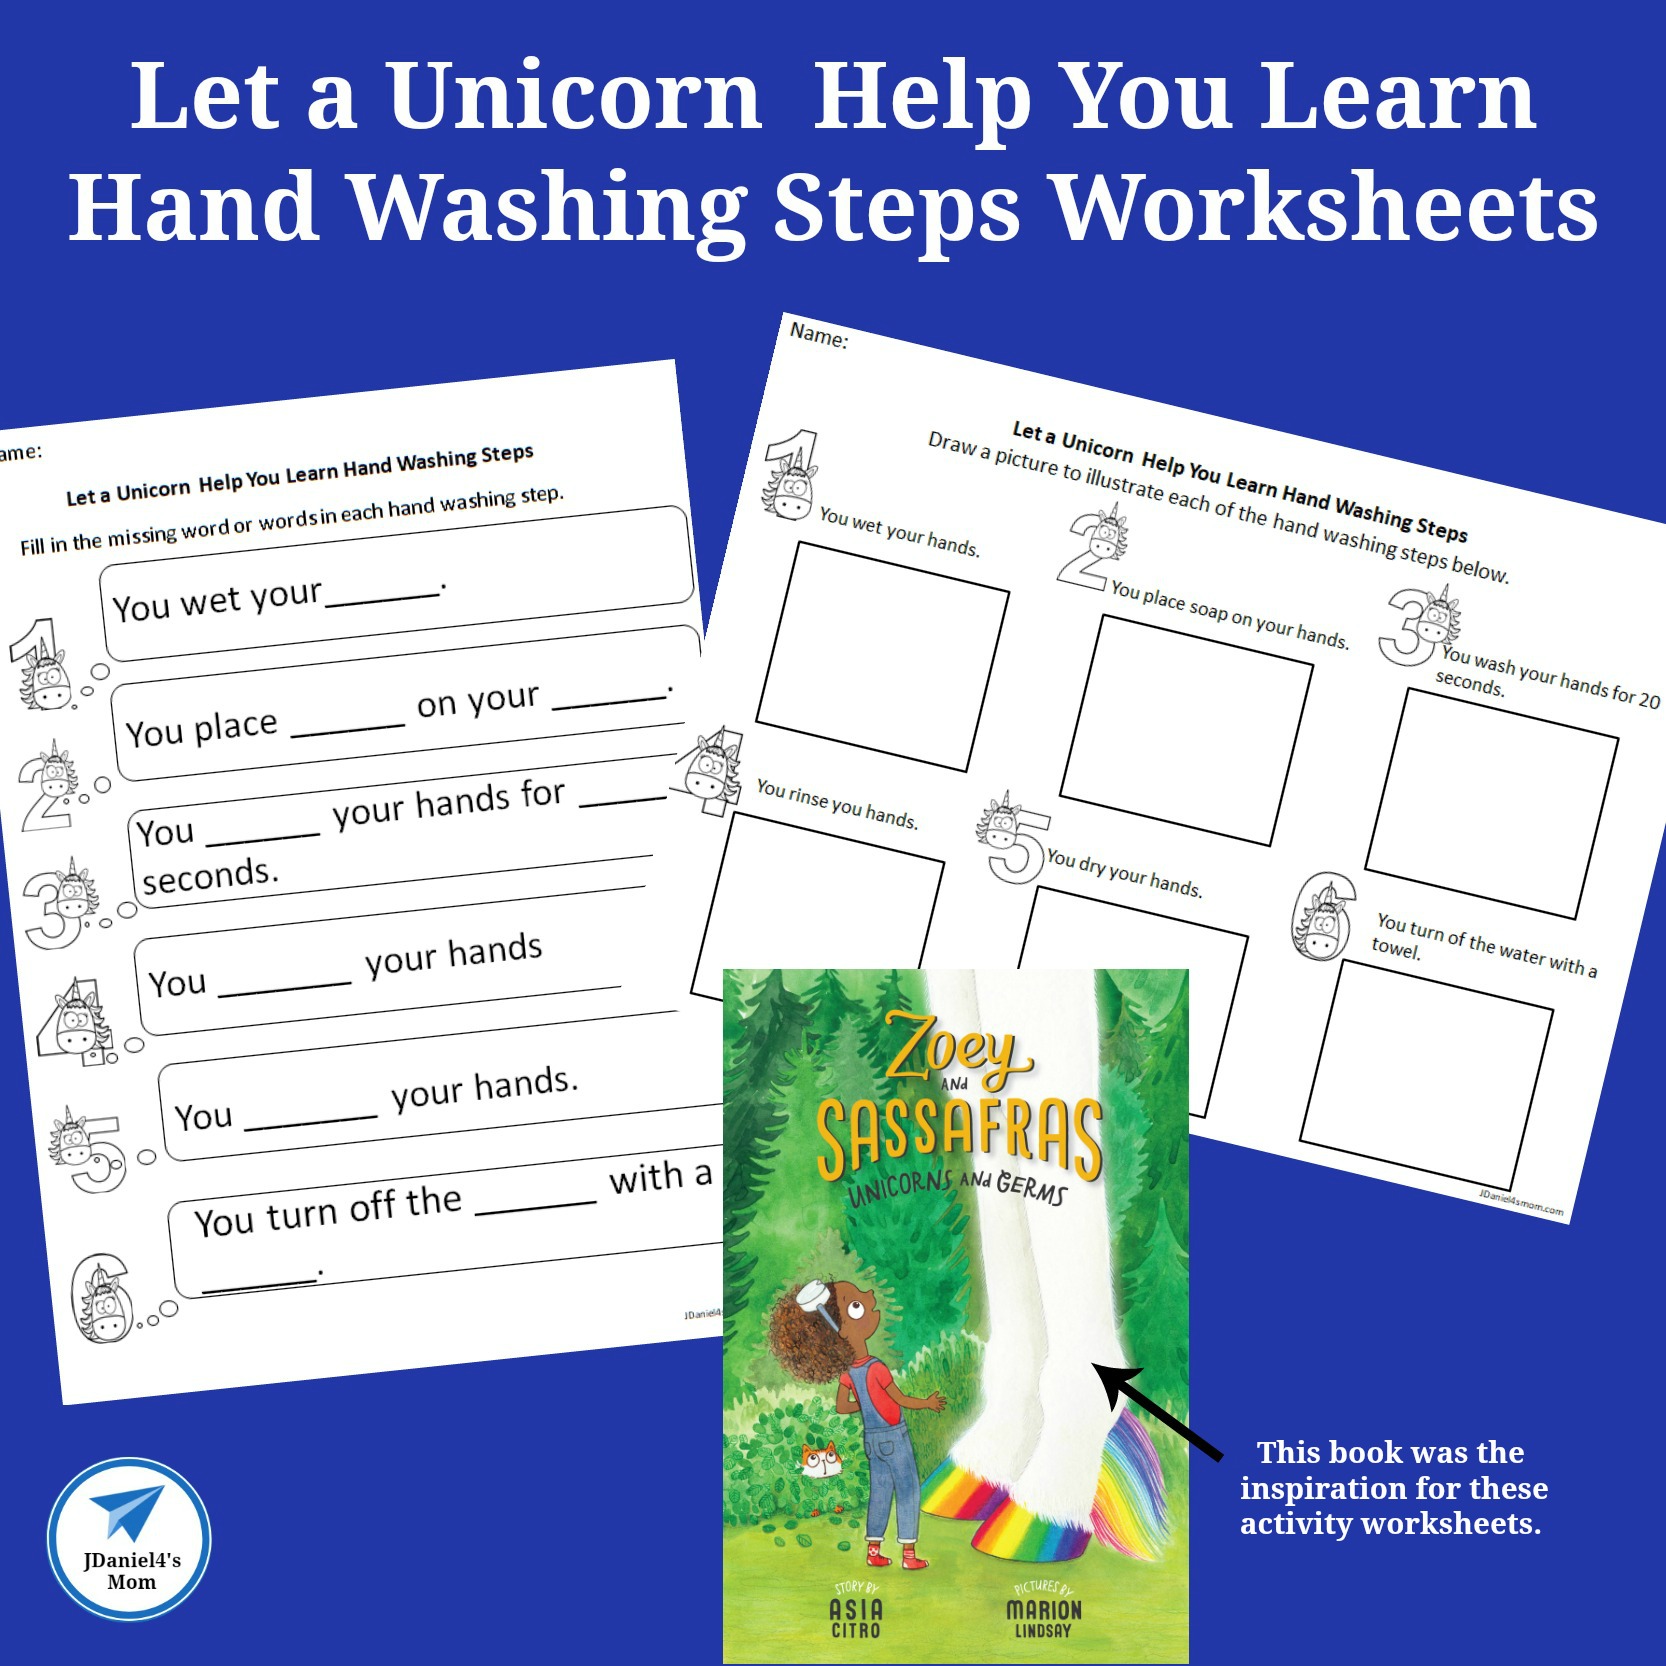 Let a Unicorn Help You Learn Hand Washing Steps Worksheets- F It is part of the Zoey and Sassafras series.